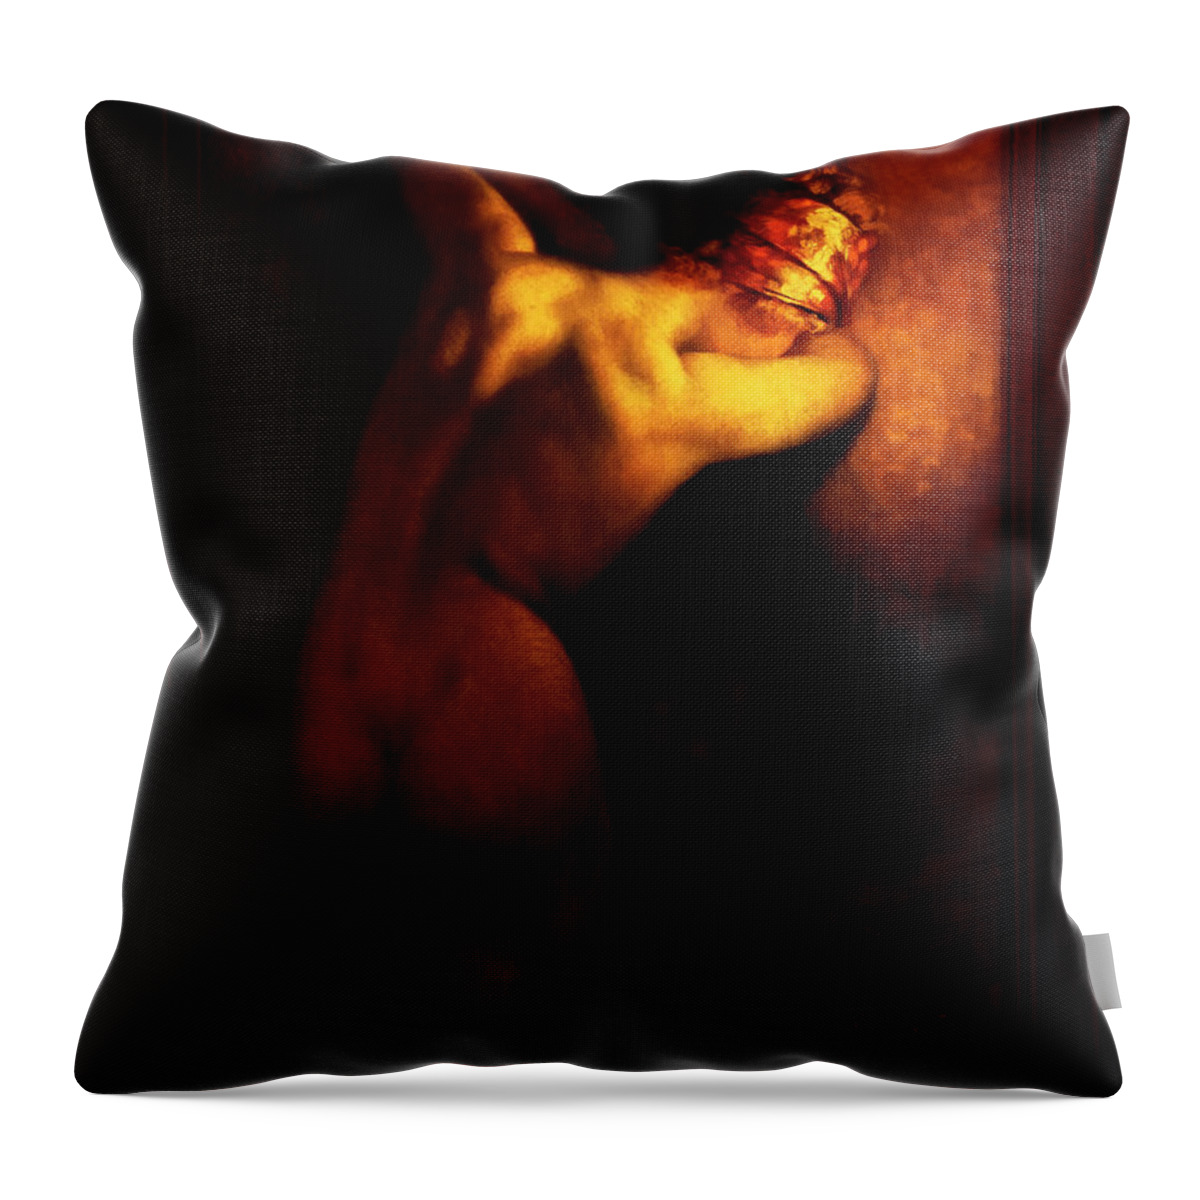 Nude Female Portrait Throw Pillow featuring the painting Woman By Golden Light by Albert Joseph Penot Classical Art Old Masters Reproduction by Rolando Burbon